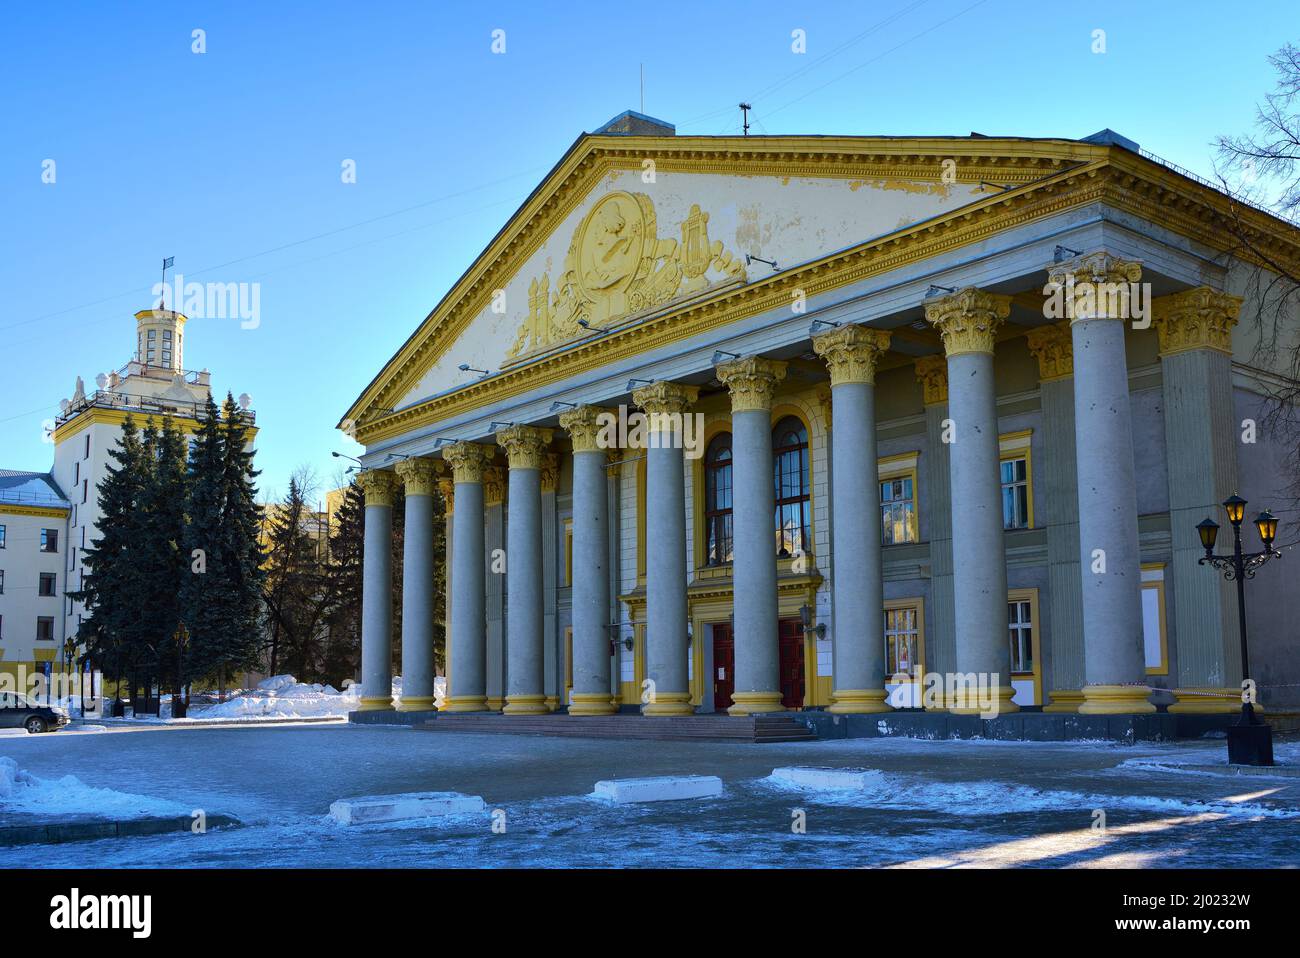 Novosibirsk, Siberia, Russia, 03.12.2022: Facade of the Gorky House of Culture. An architectural monument of Soviet classicism with a grandiose colonn Stock Photo